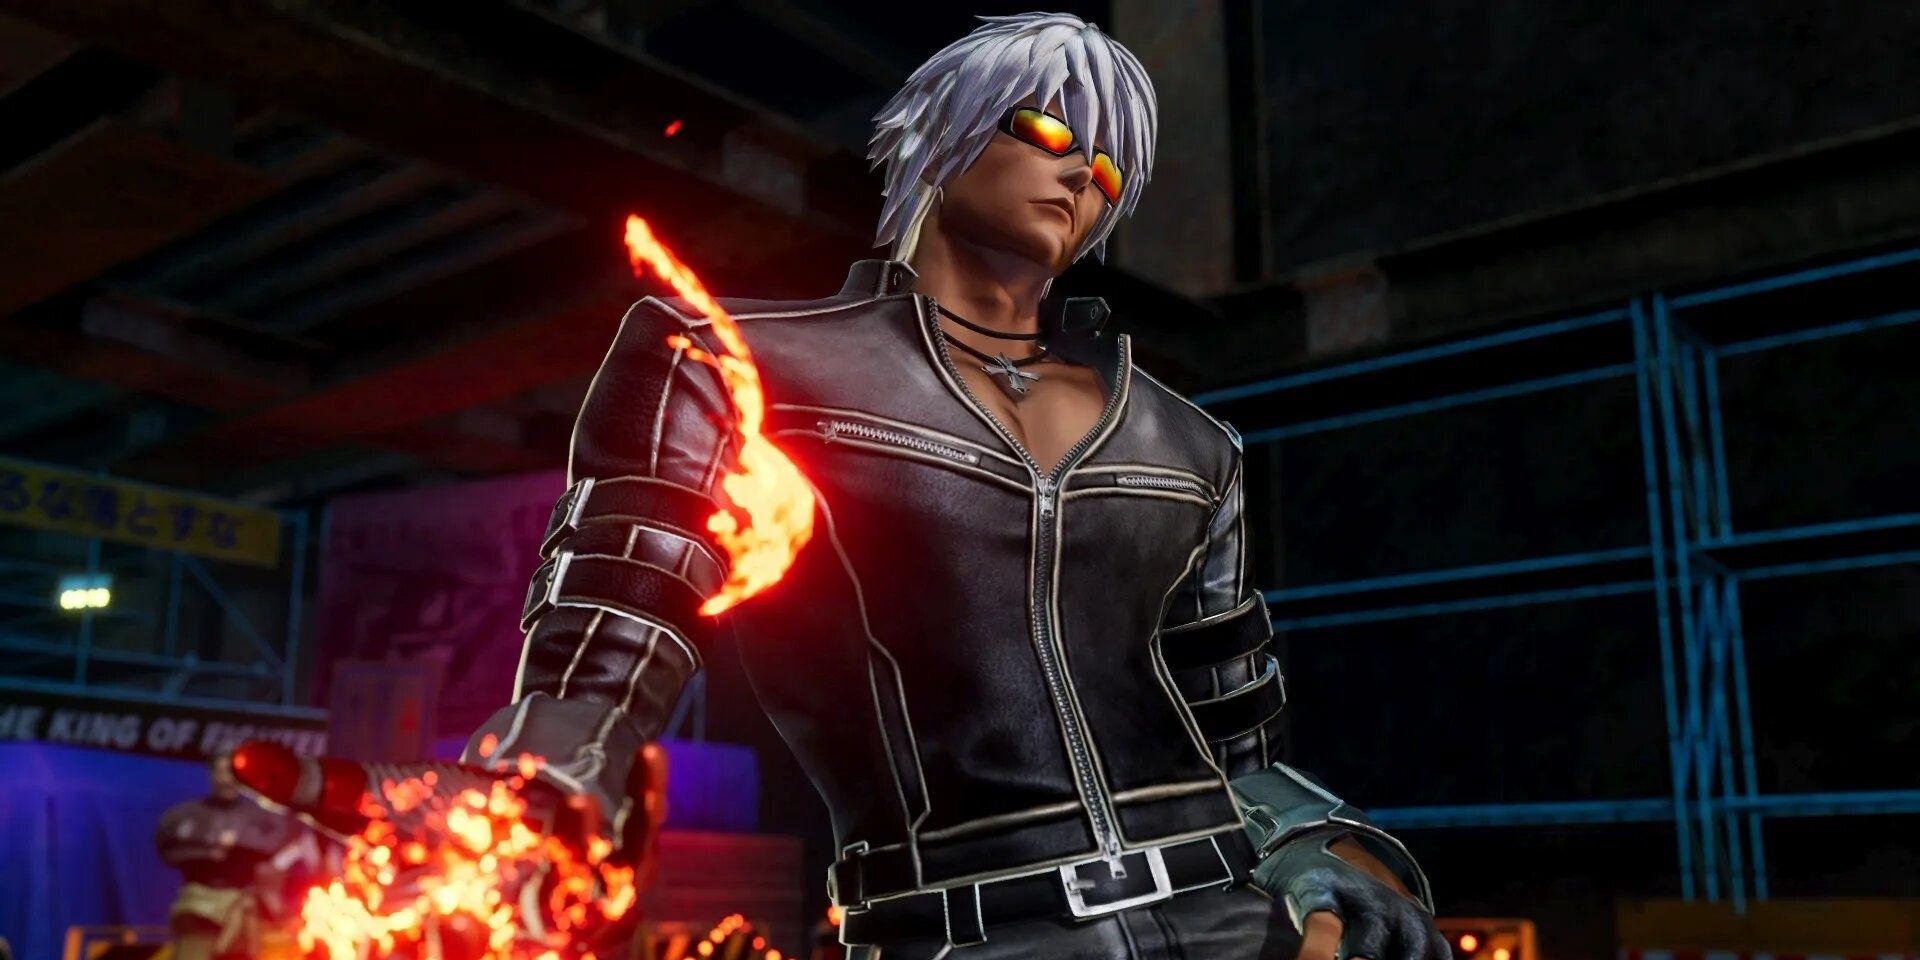 K' from The King of Fighters